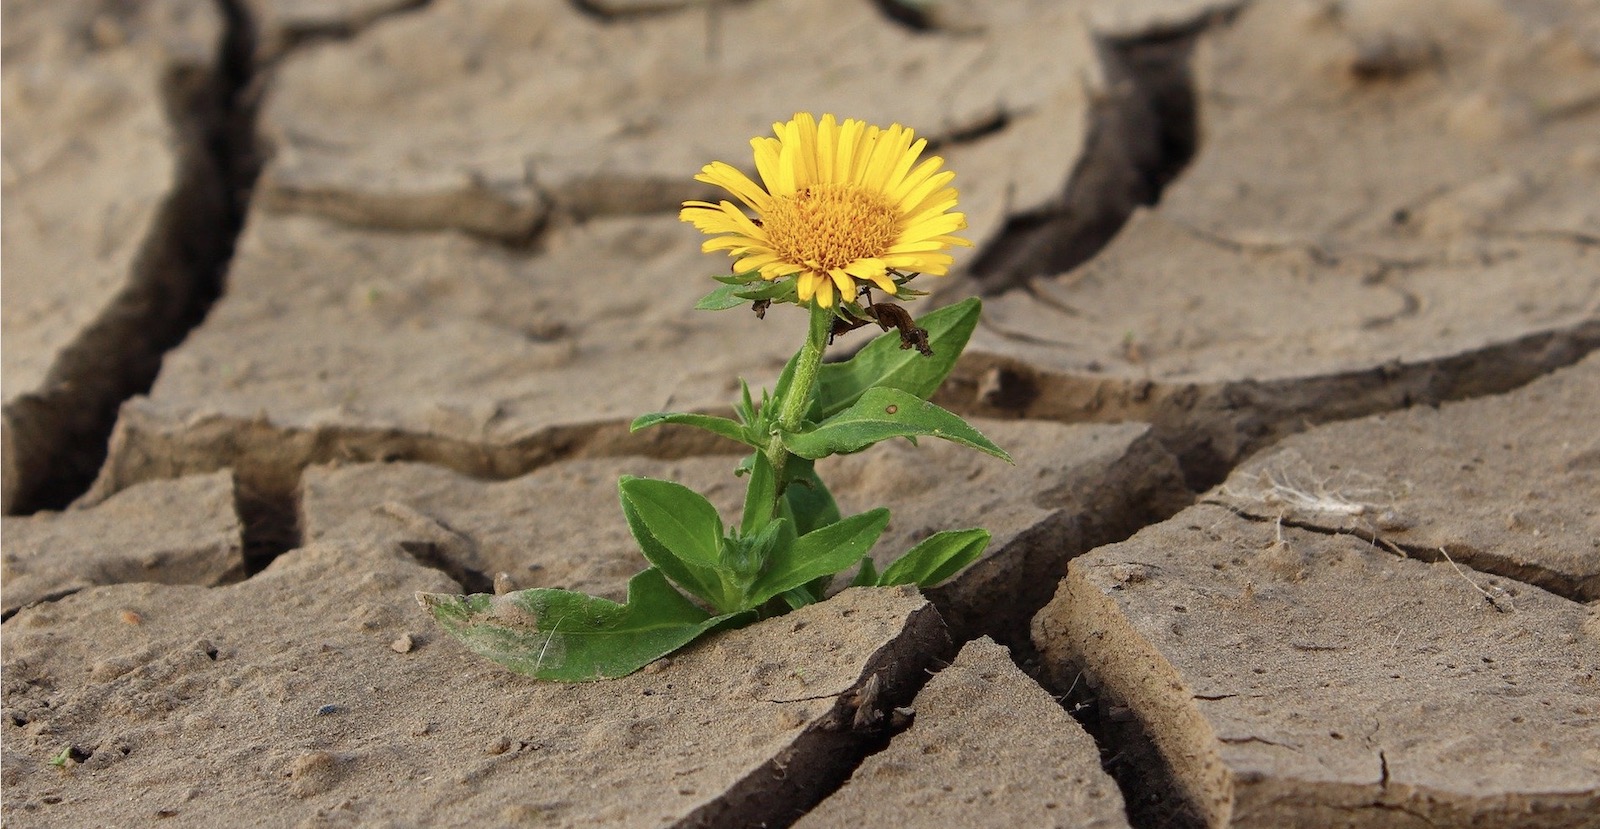 Flower discovered growing from parched earth